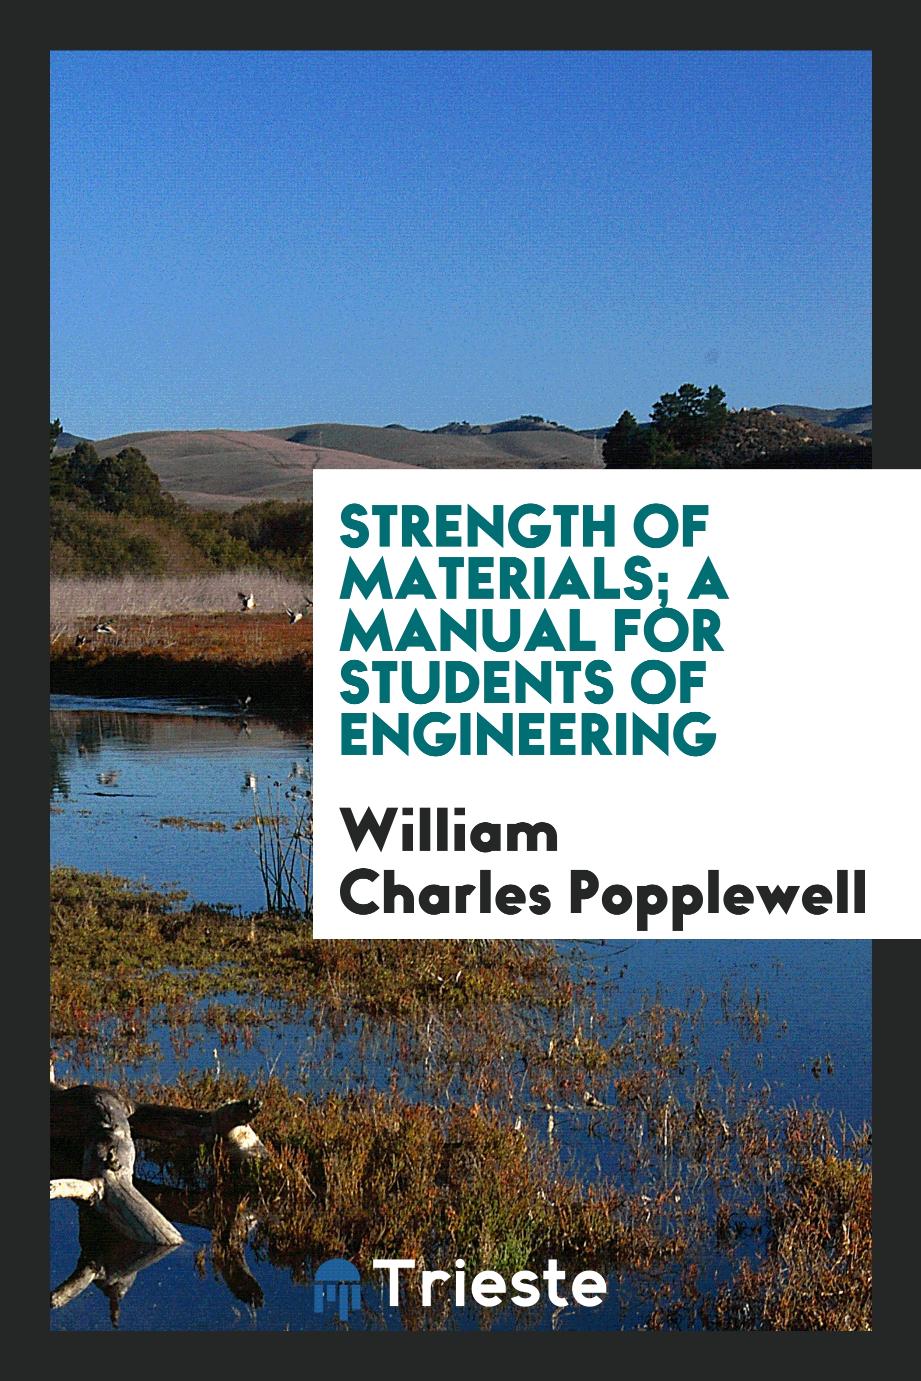 Strength of materials; a manual for students of engineering